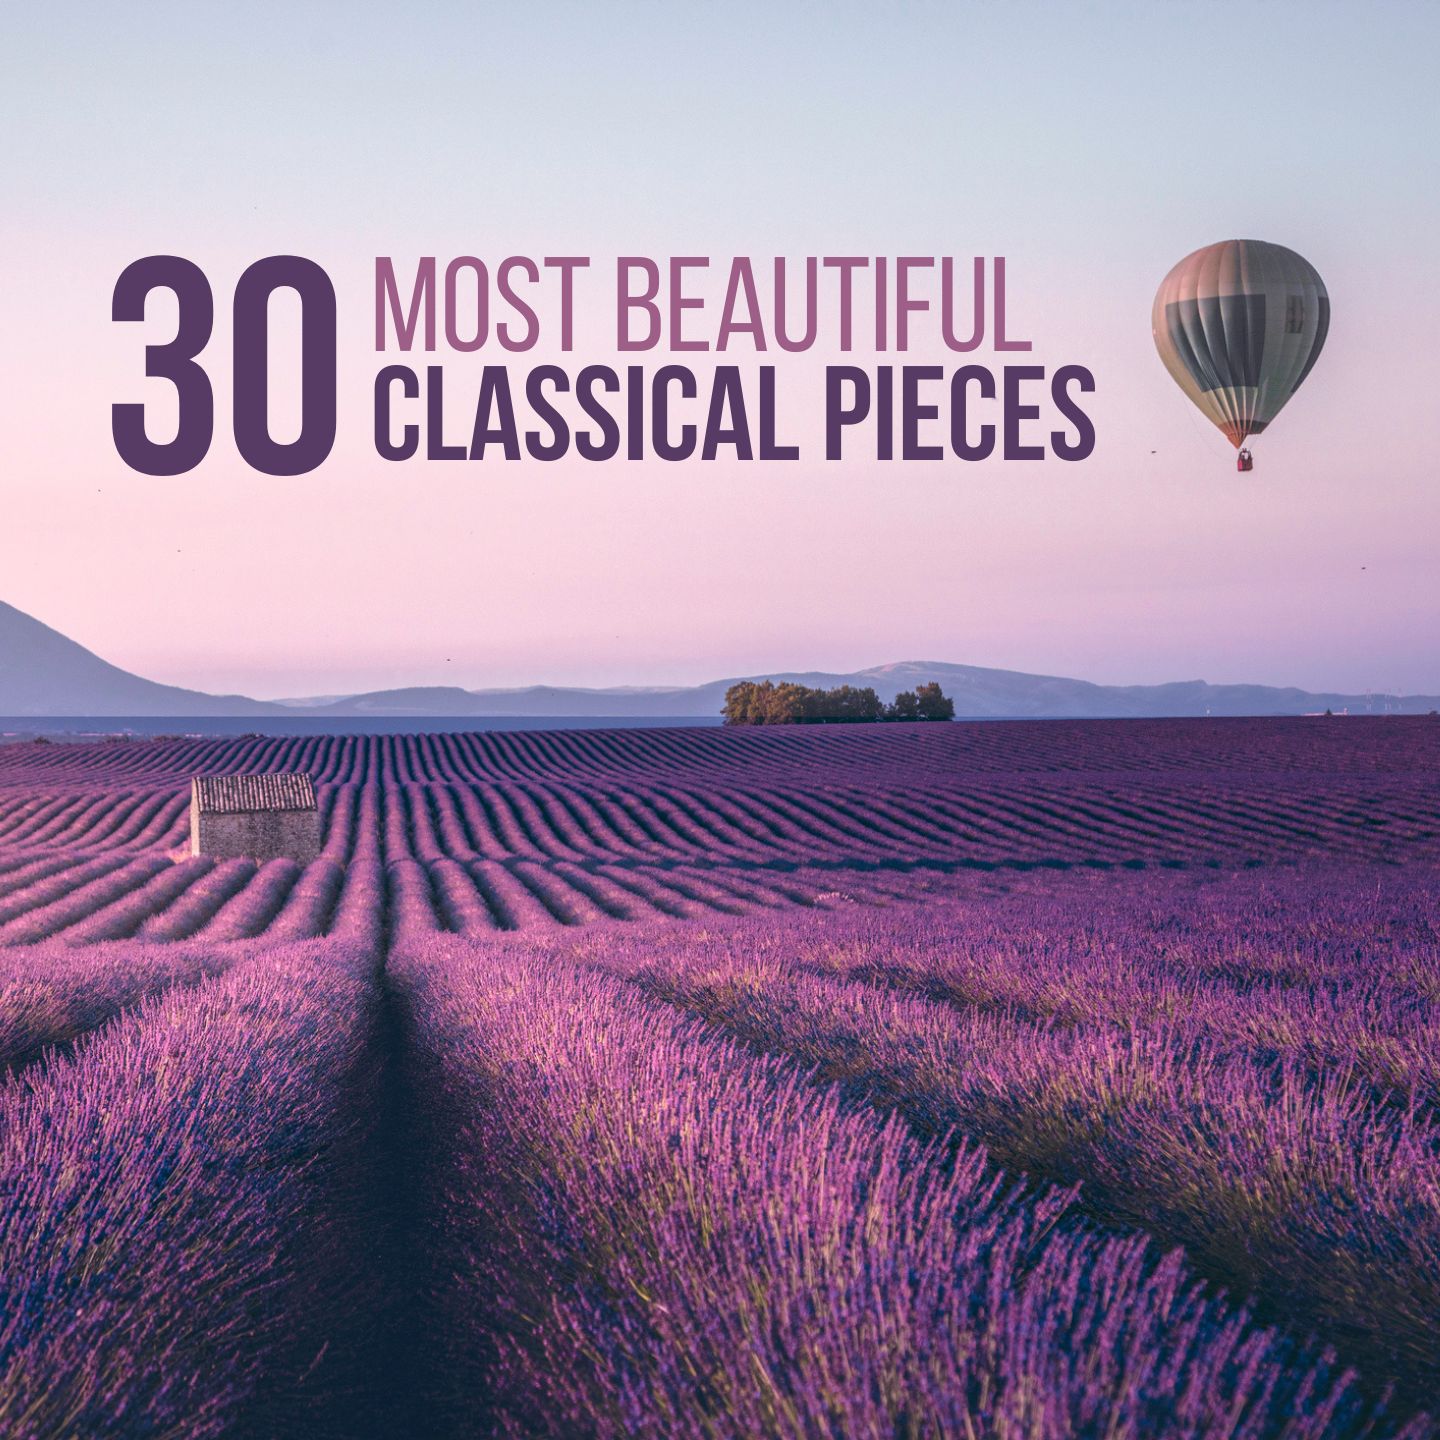 30 Most Beautiful Classical Music Pieces